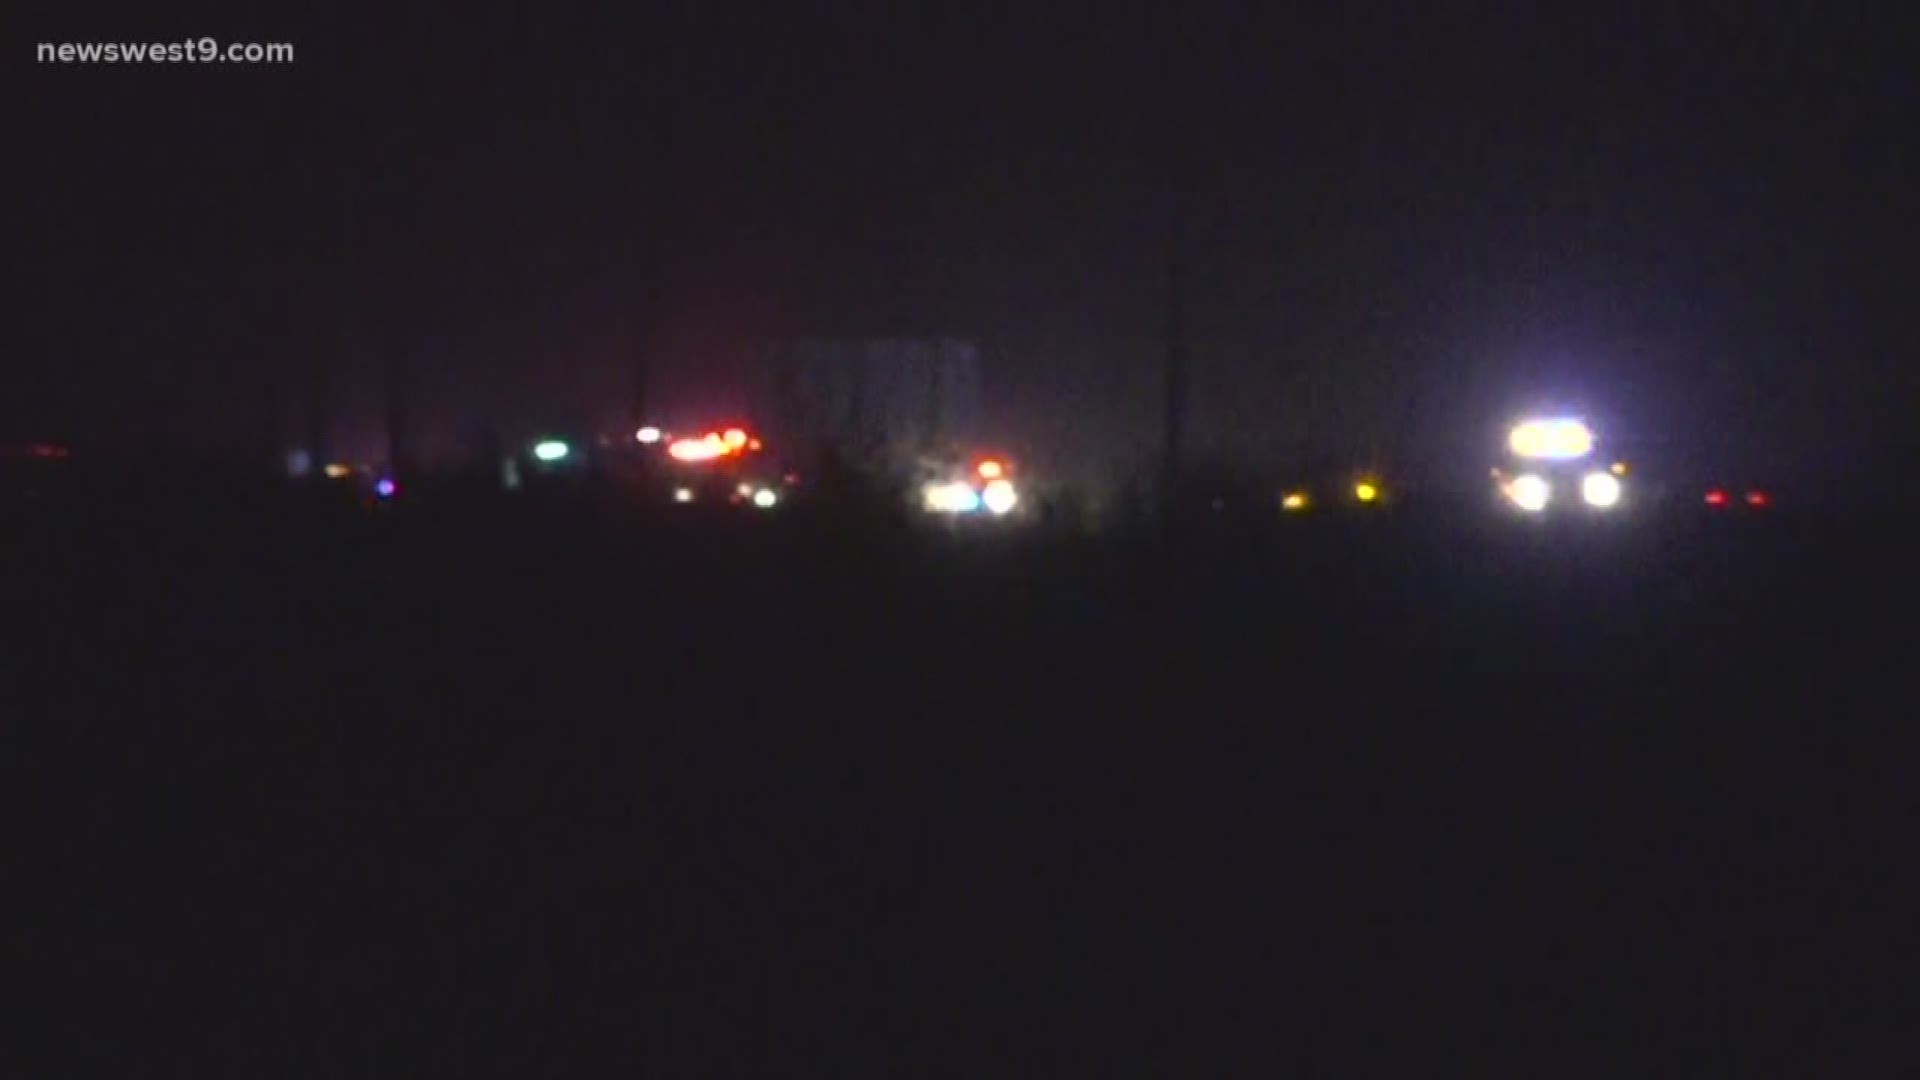 On northwest intersection of Hwy 385 and N Loop 338, officials are responding to a large fire.